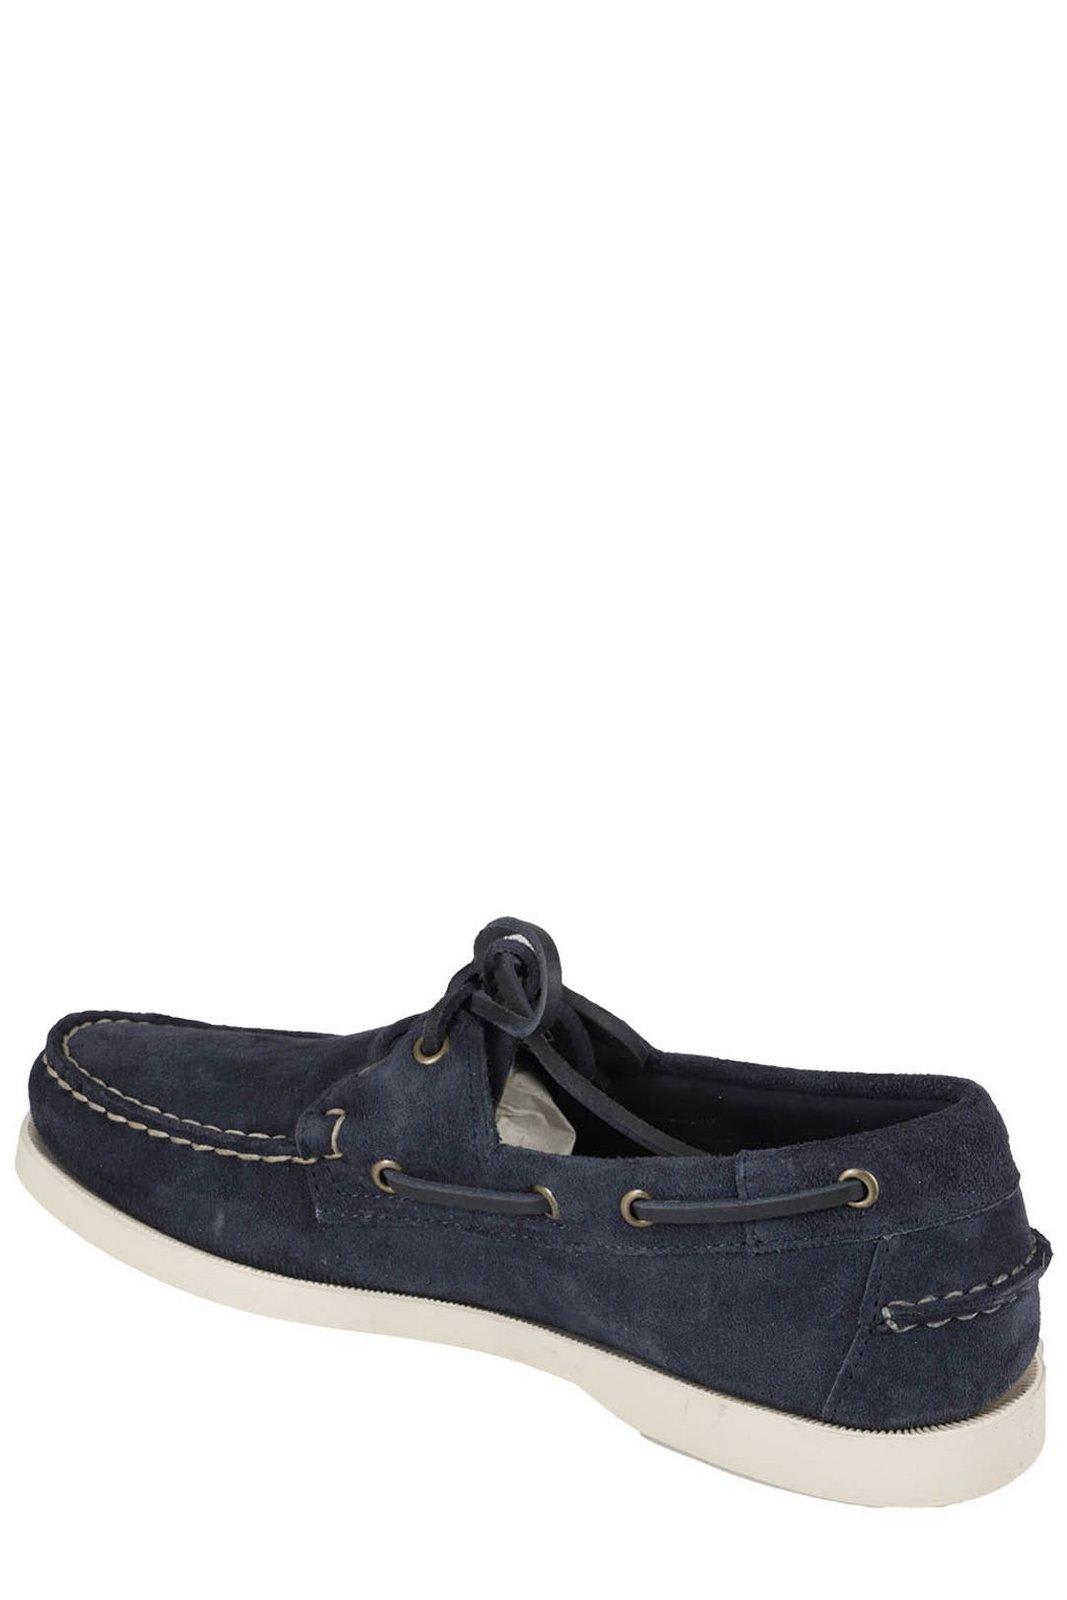 Shop Sebago Lace-up Round Toe Boat Shoes In Blue Navy